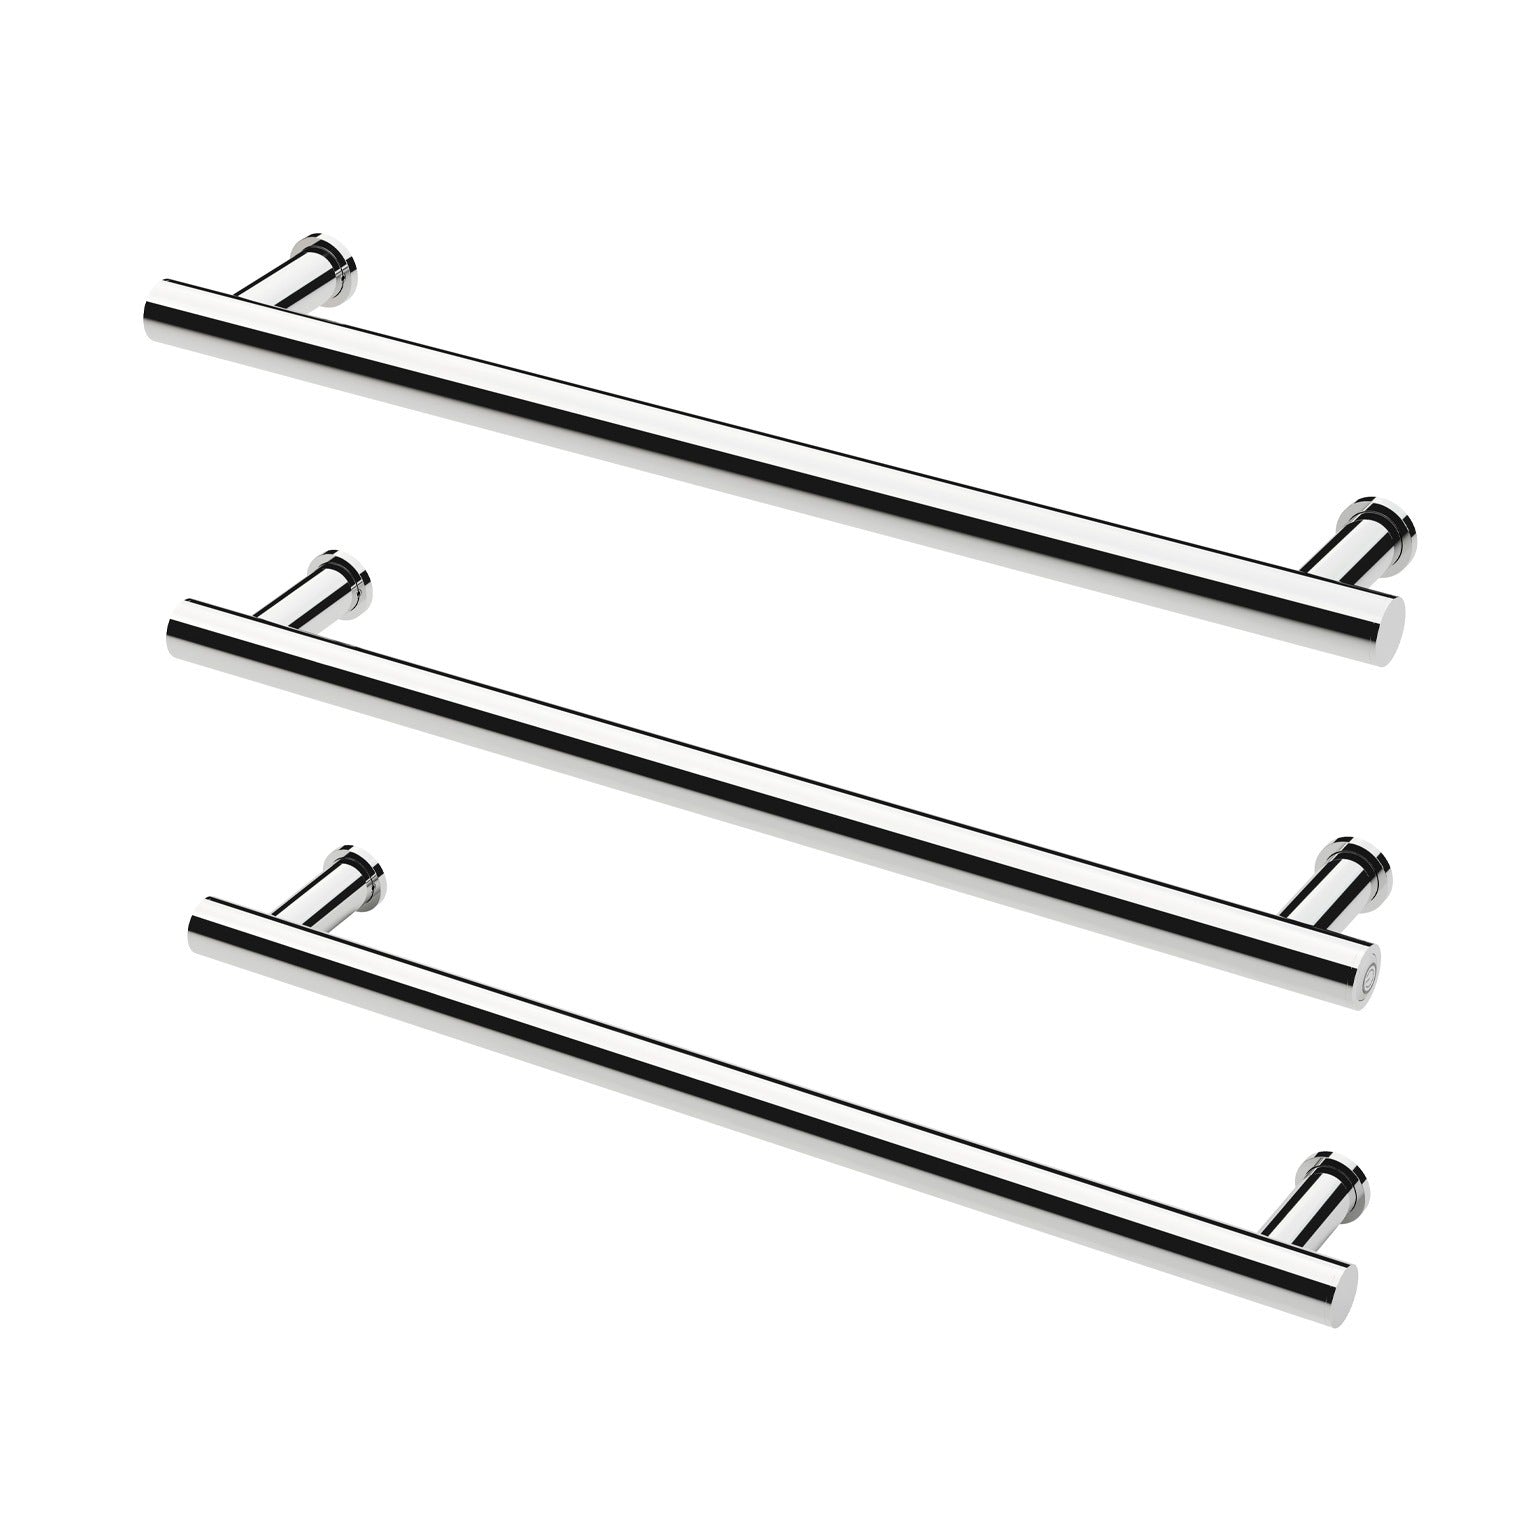 PHOENIX ROUND TRIPLE HEATED TOWEL RAIL CHROME (AVAILABLE IN 600MM AND 800MM)